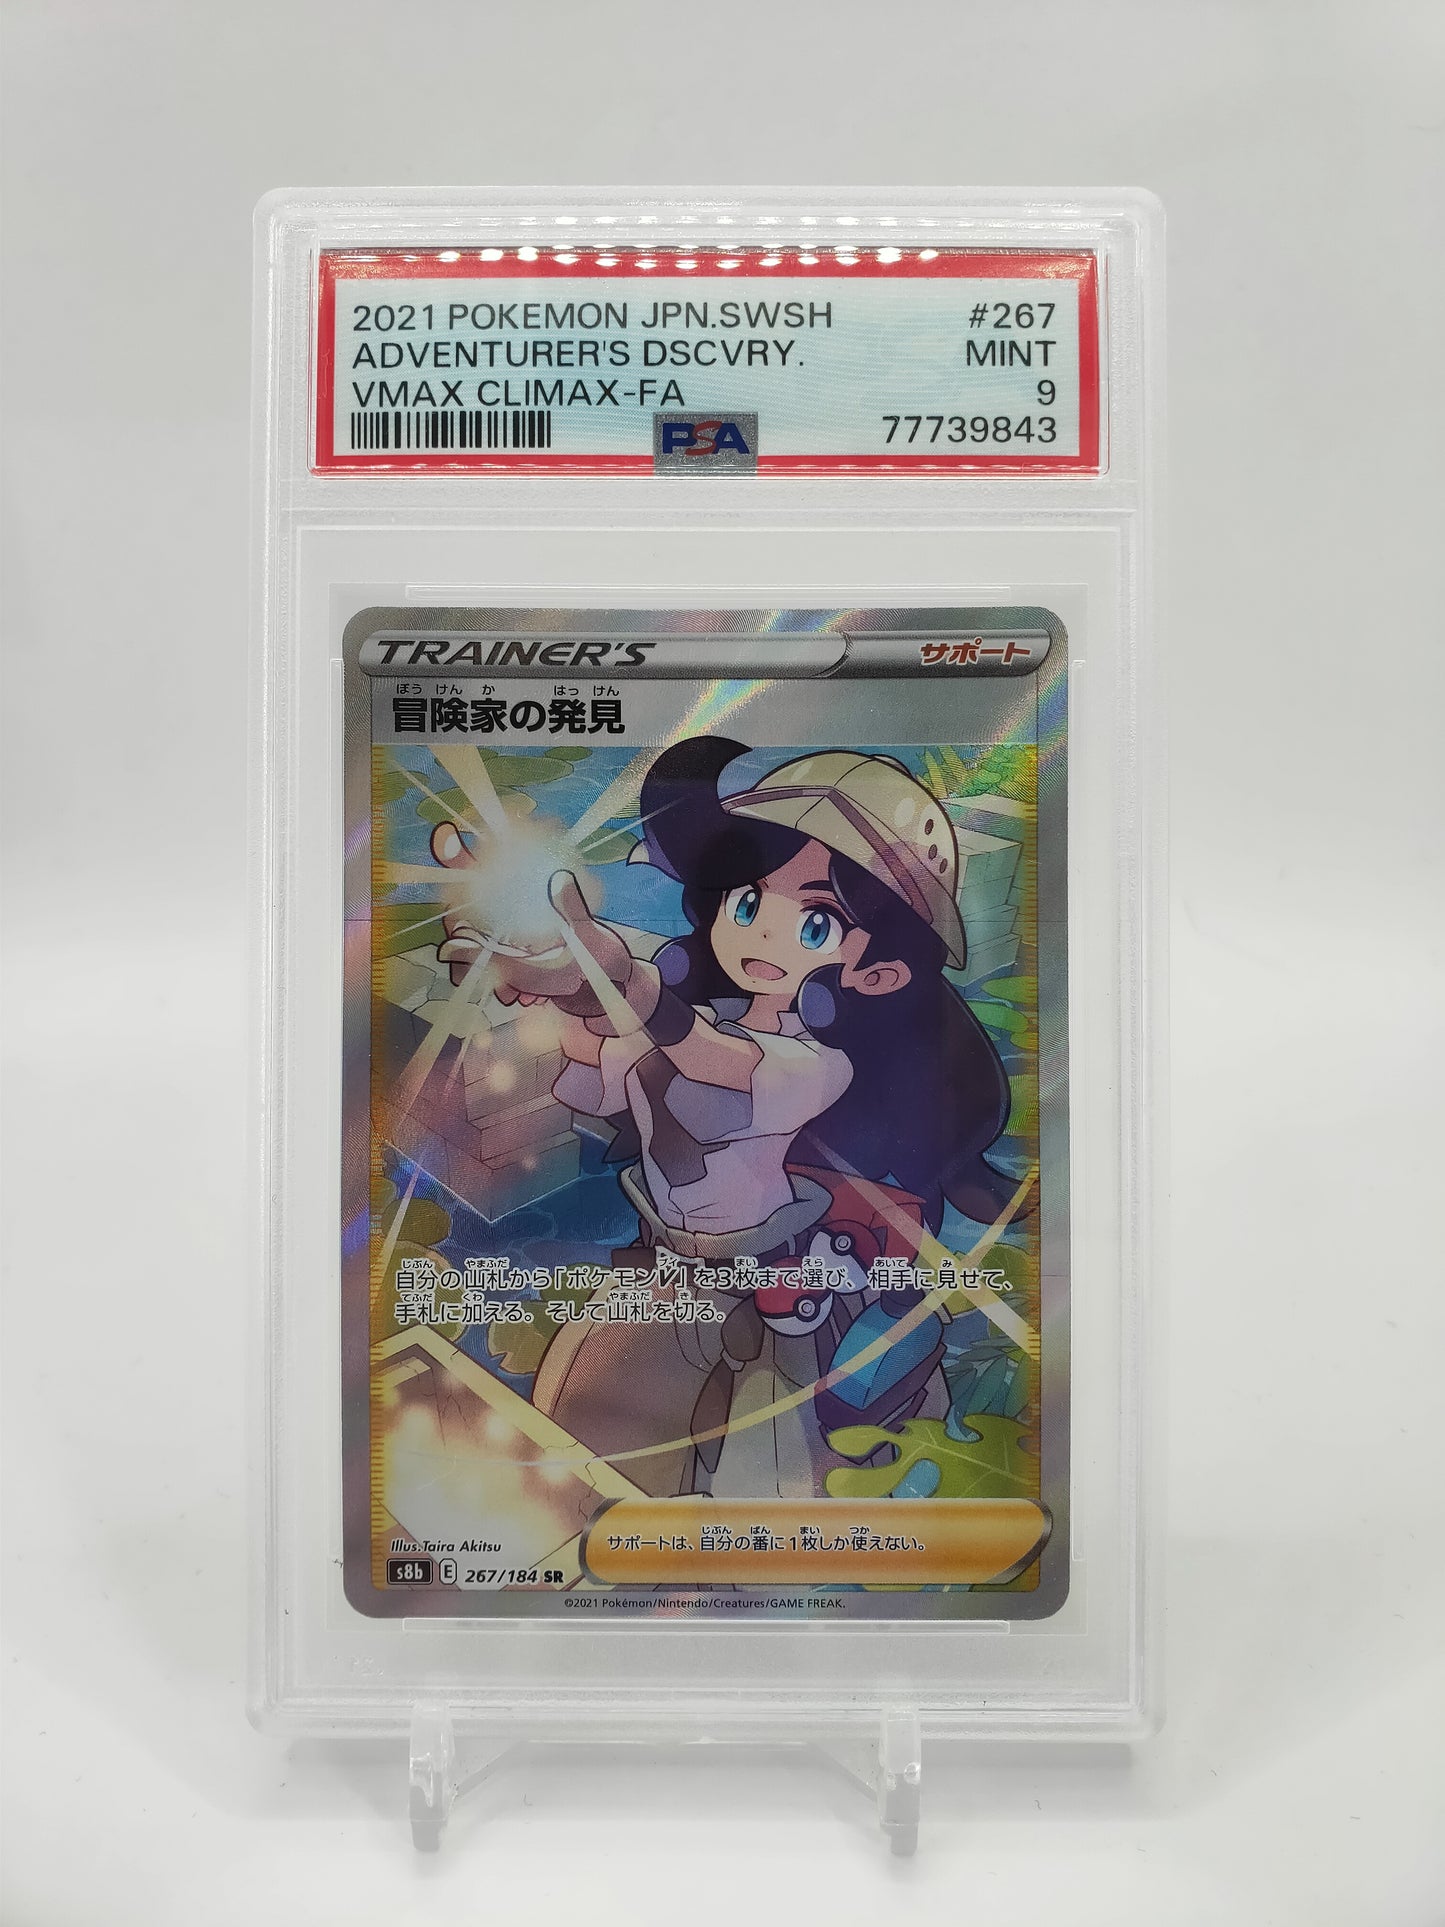 Adventurer's Discovery Full Art Vmax Climax Japanese 267/184 PSA 9